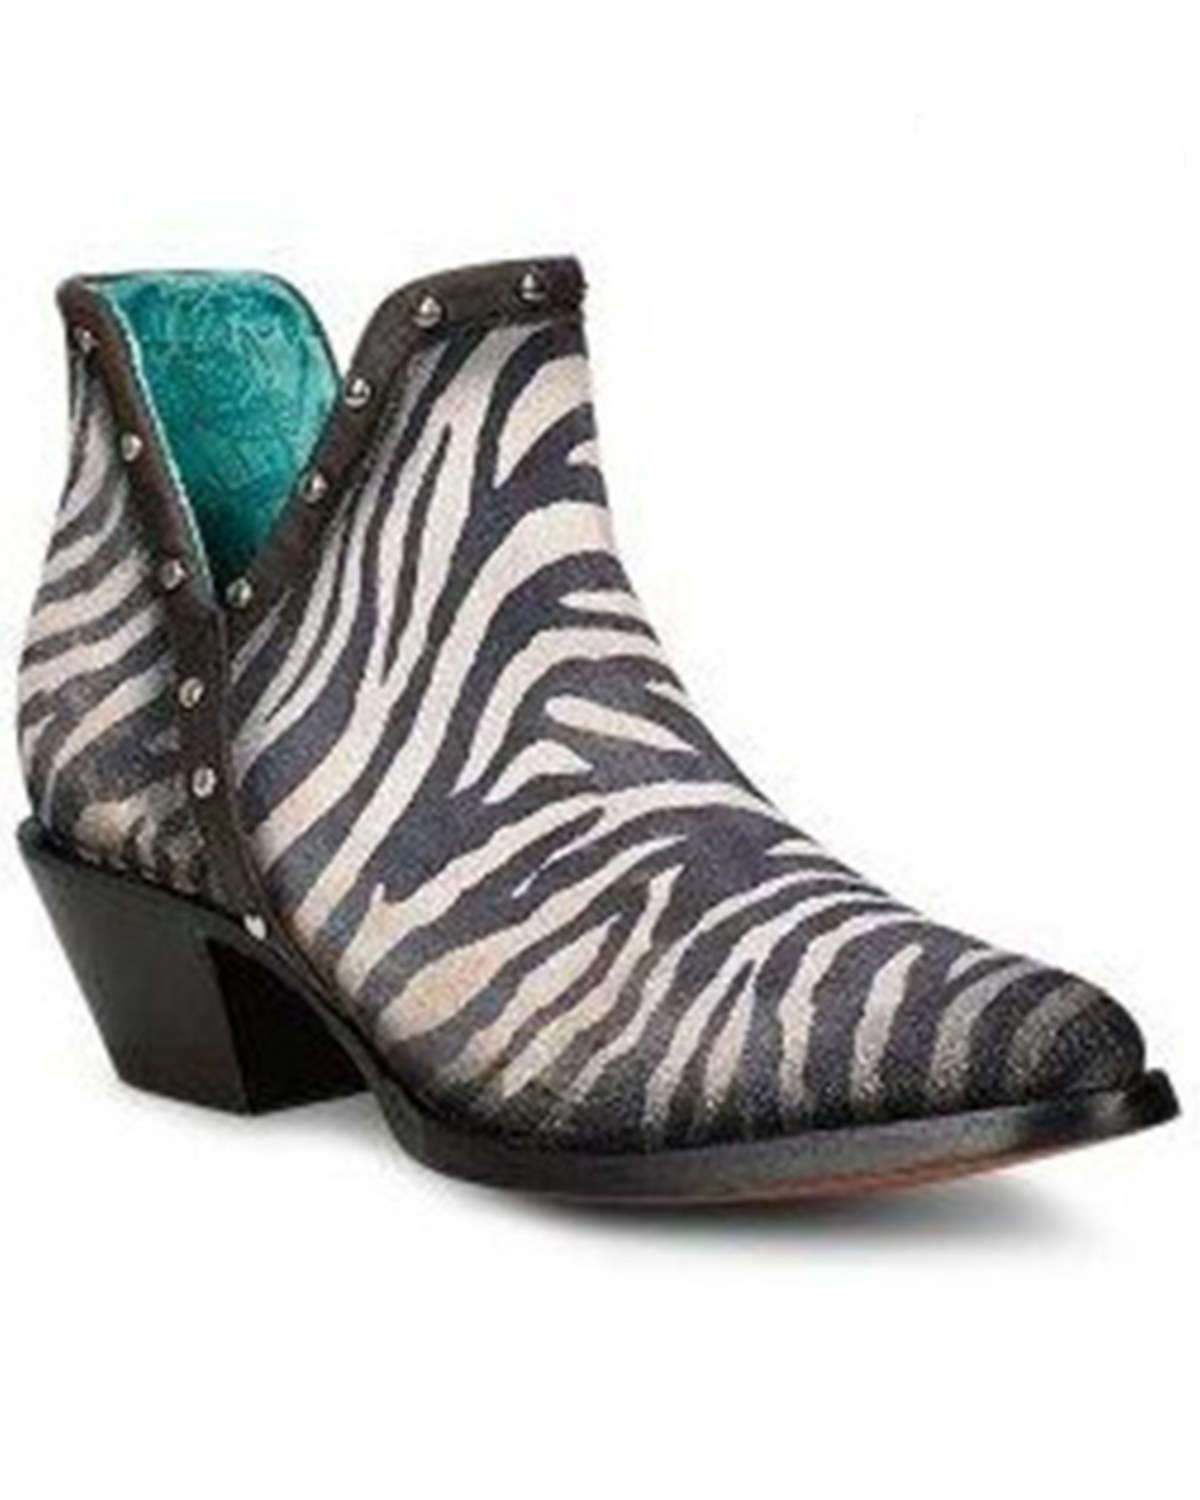 Corral Women's Zebra Print Studded Booties - Pointed Toe